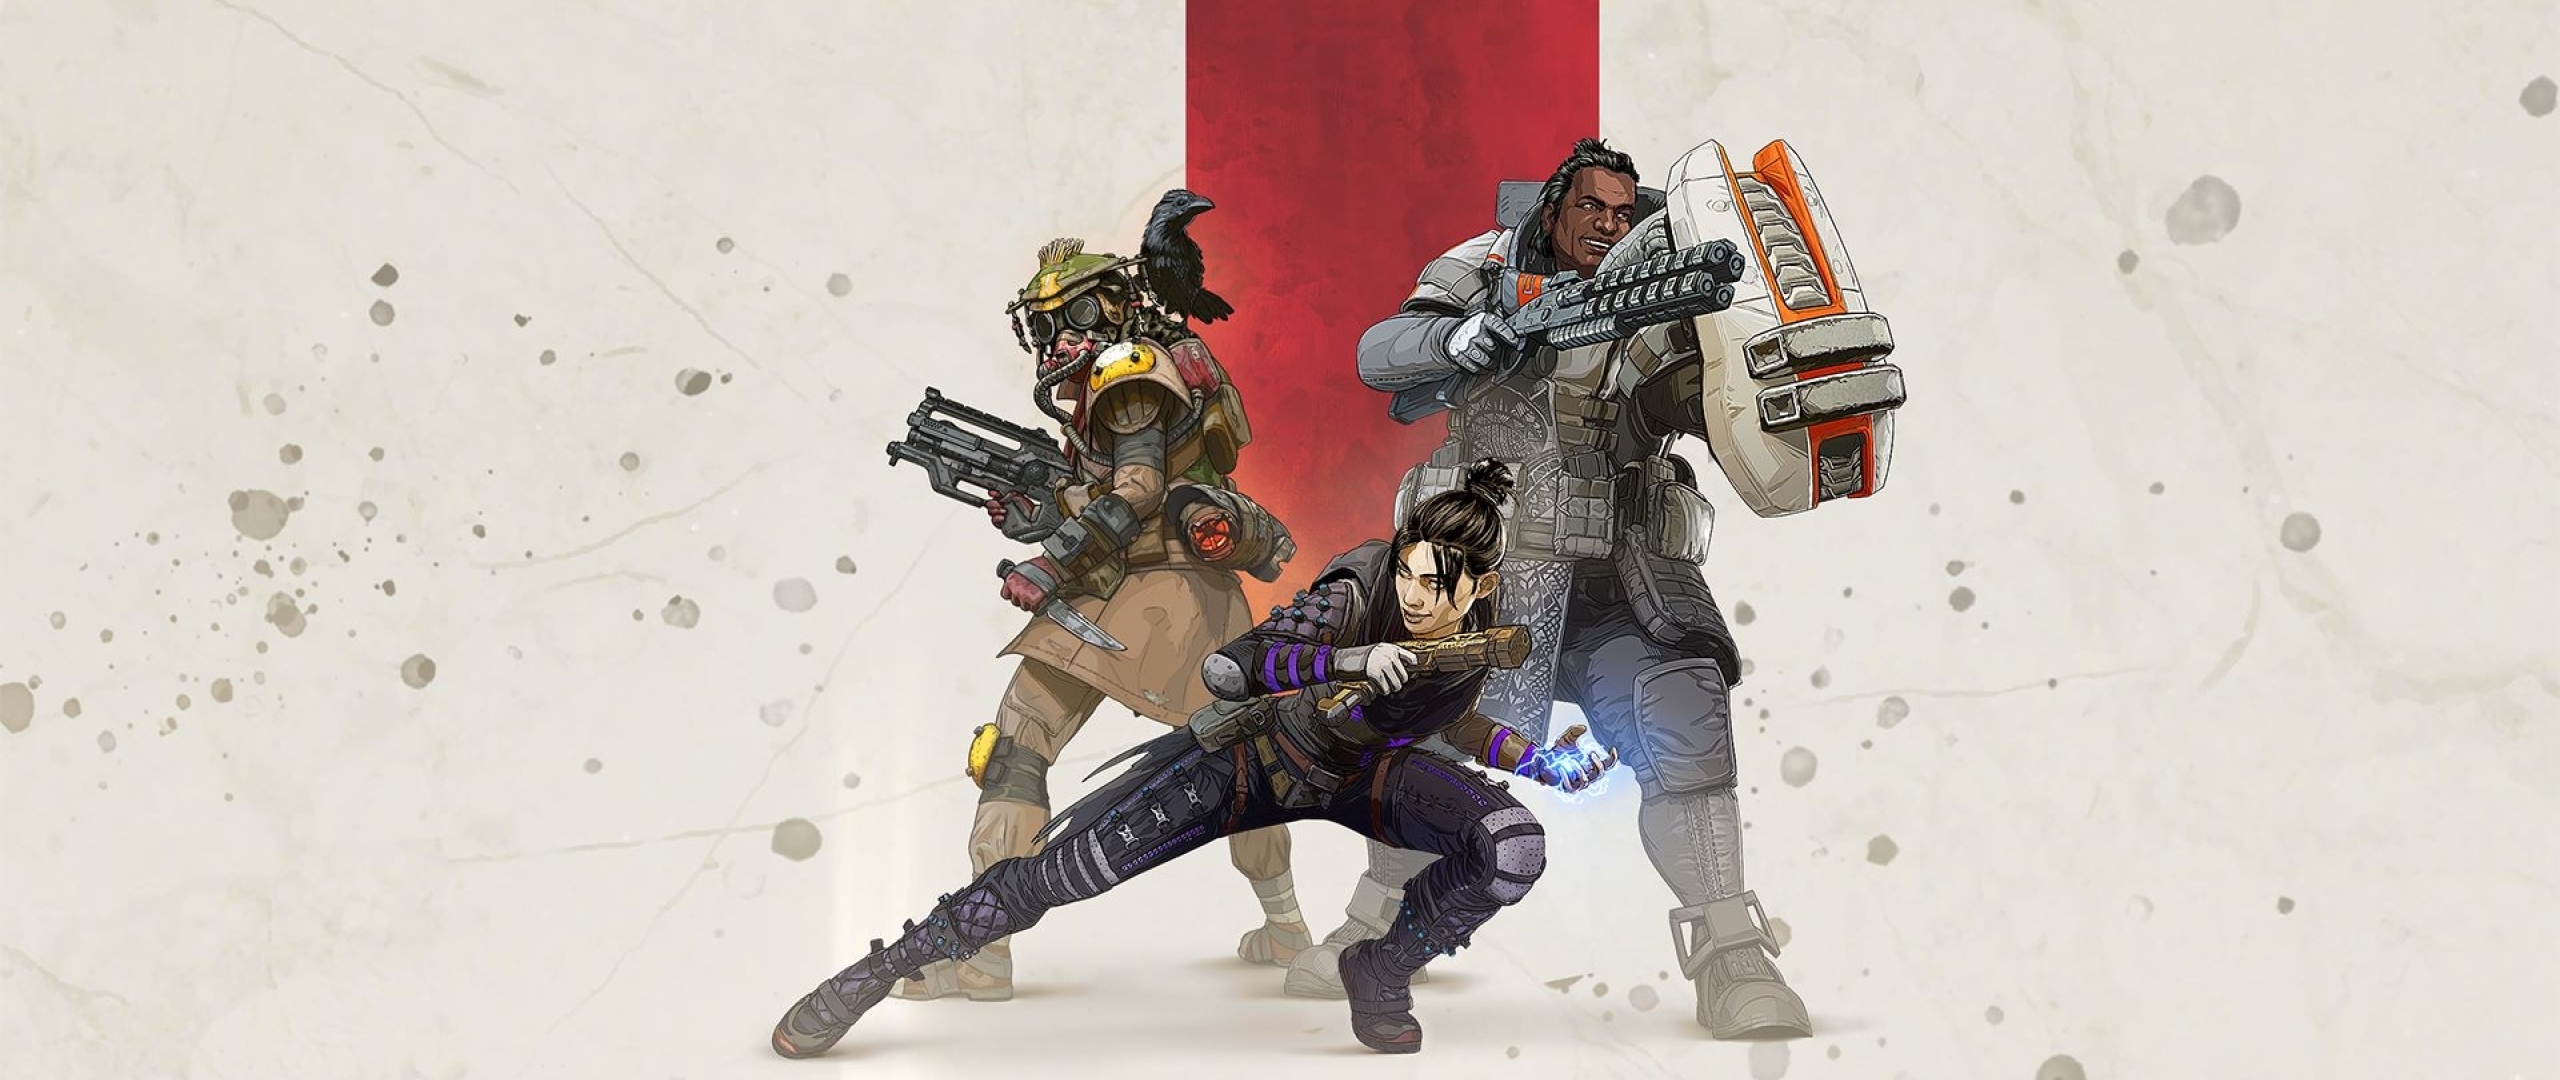 2560x1080 Apex Legends 2560x1080 Resolution Wallpaper Hd Games 4k Wallpapers Images Photos And Background